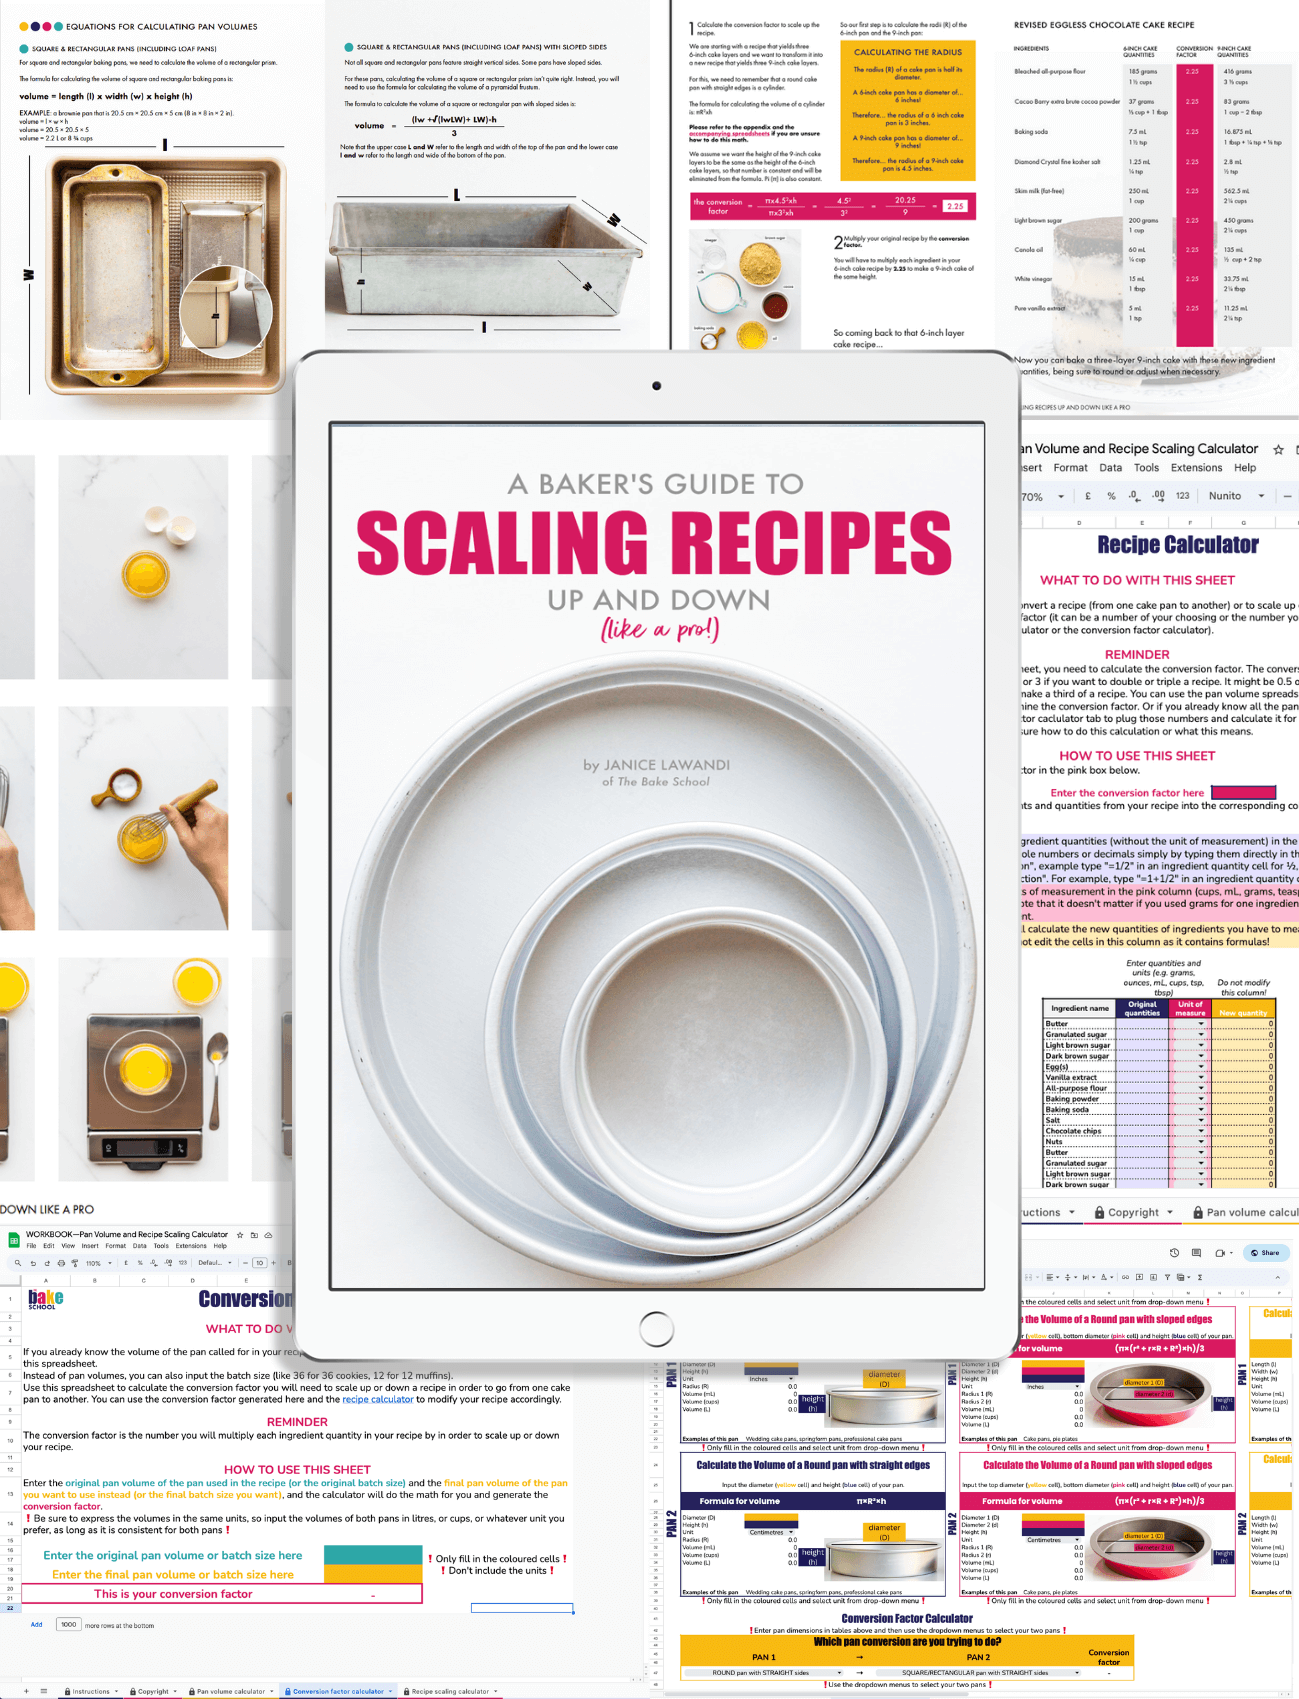 A collage of sample pages and spreadsheets from the ebook + workbook bundle "Scale Recipes Up and Down Like a Pro".